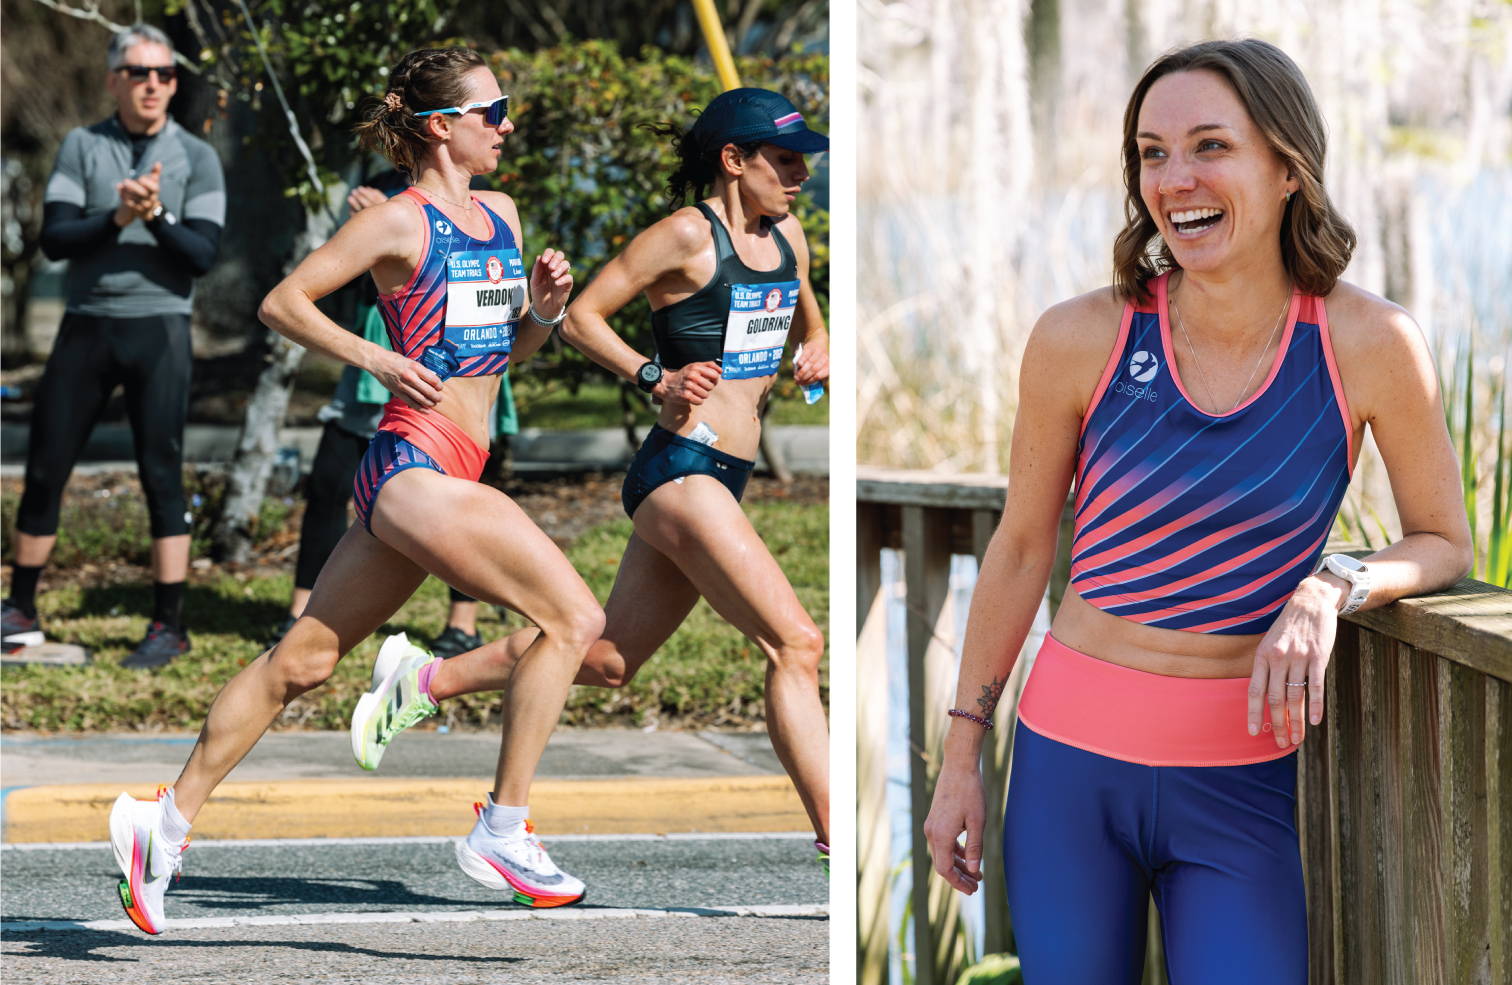 Left: Carrie Verdon racing the Olympic Marathon Trials. Right: Portrait of a happy Carrie Verdon in her Oiselle uniform